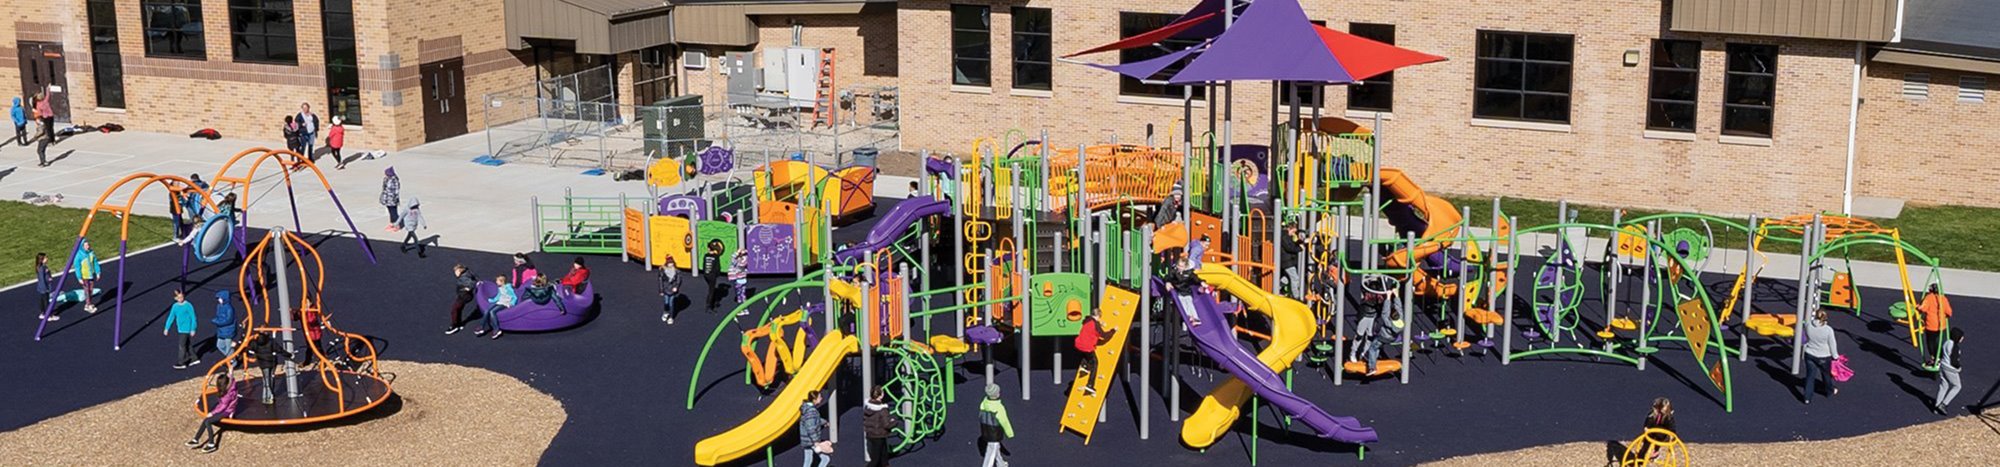 Fitness Playgrounds